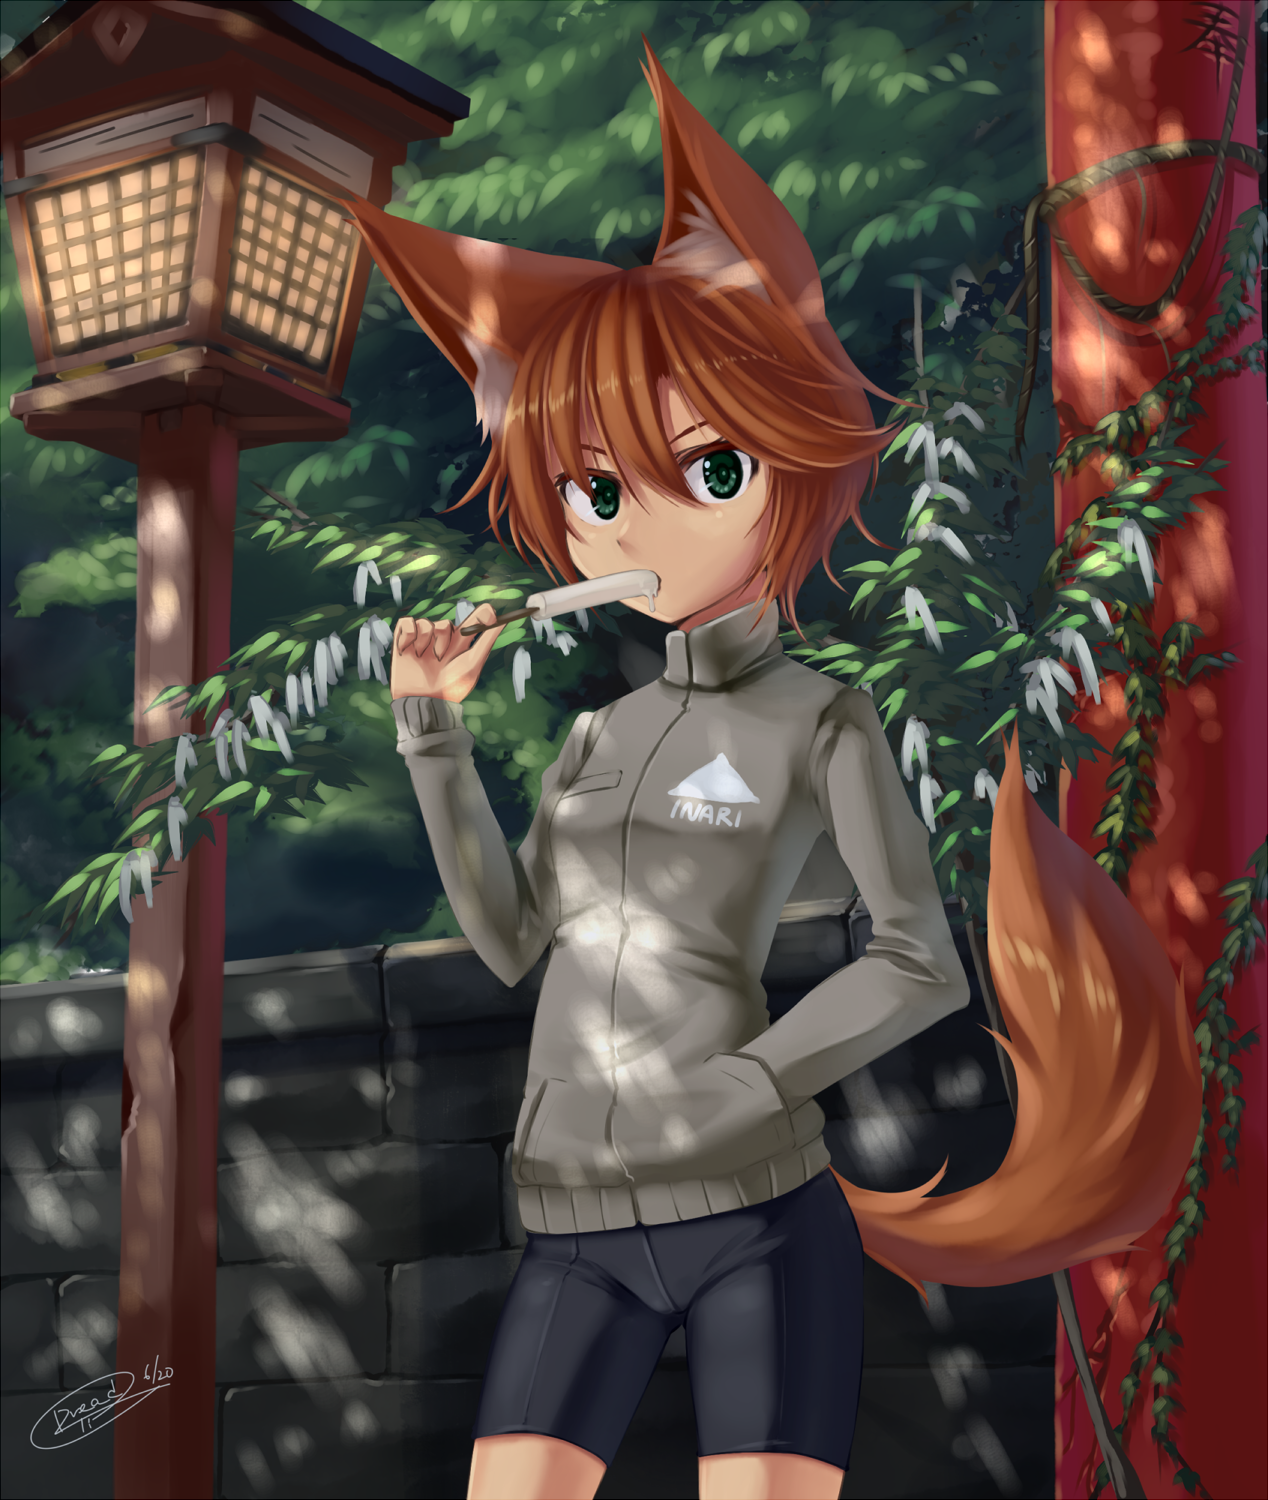 Anime 1268x1500 anime anime girls animal ears forest ice cream fox girl Pixiv food sweets popsicle hair in face